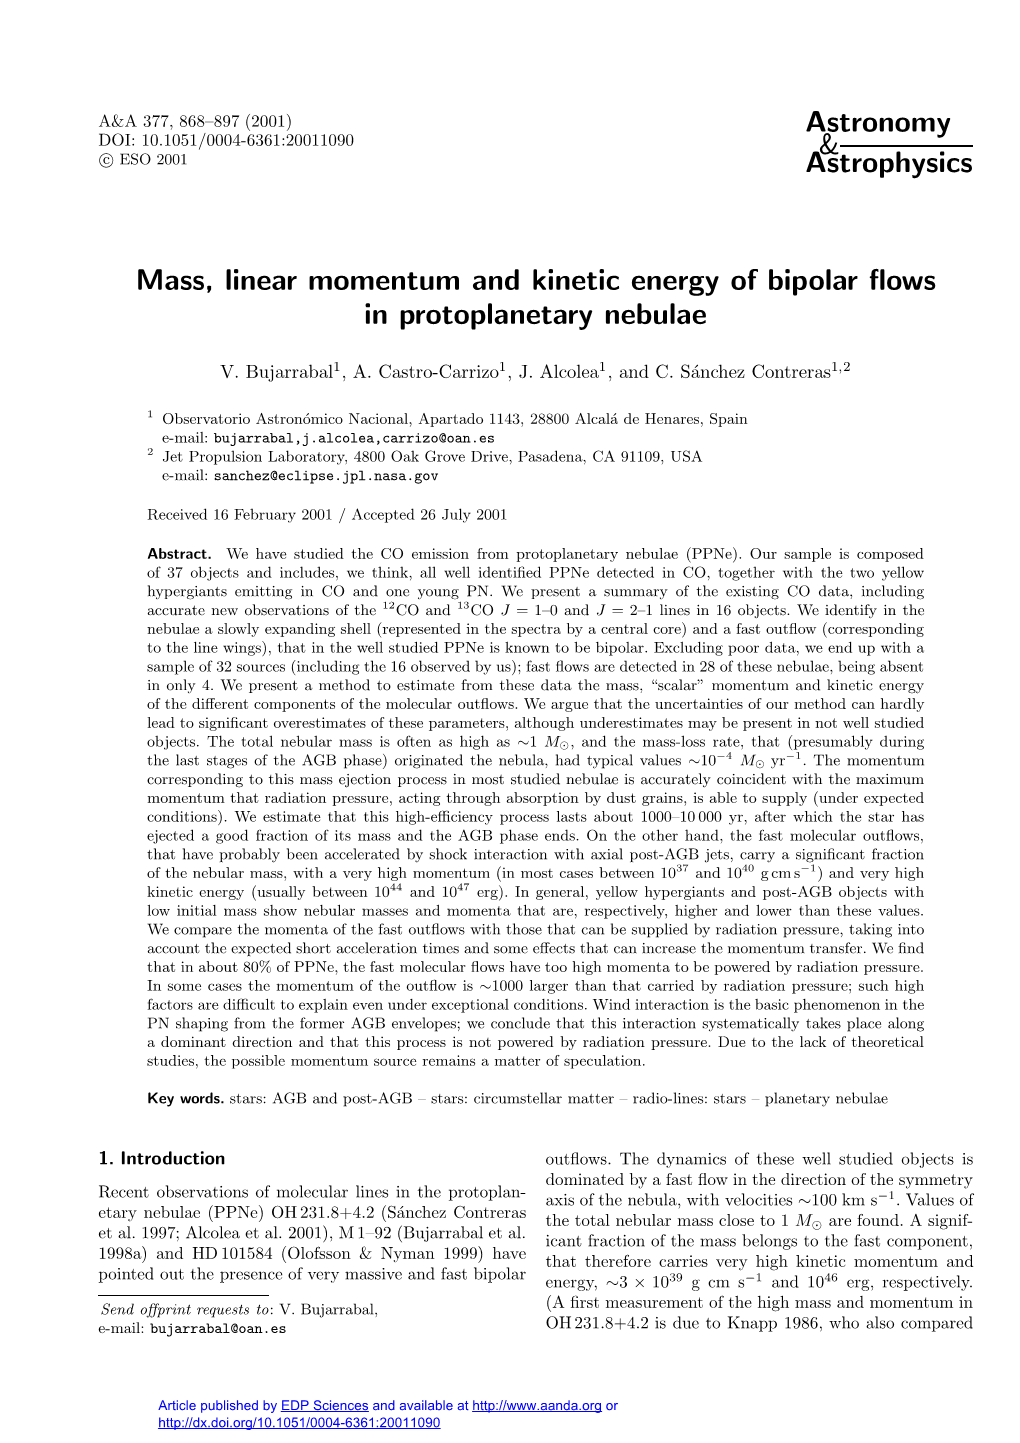 Mass, Linear Momentum and Kinetic Energy of Bipolar Flows In